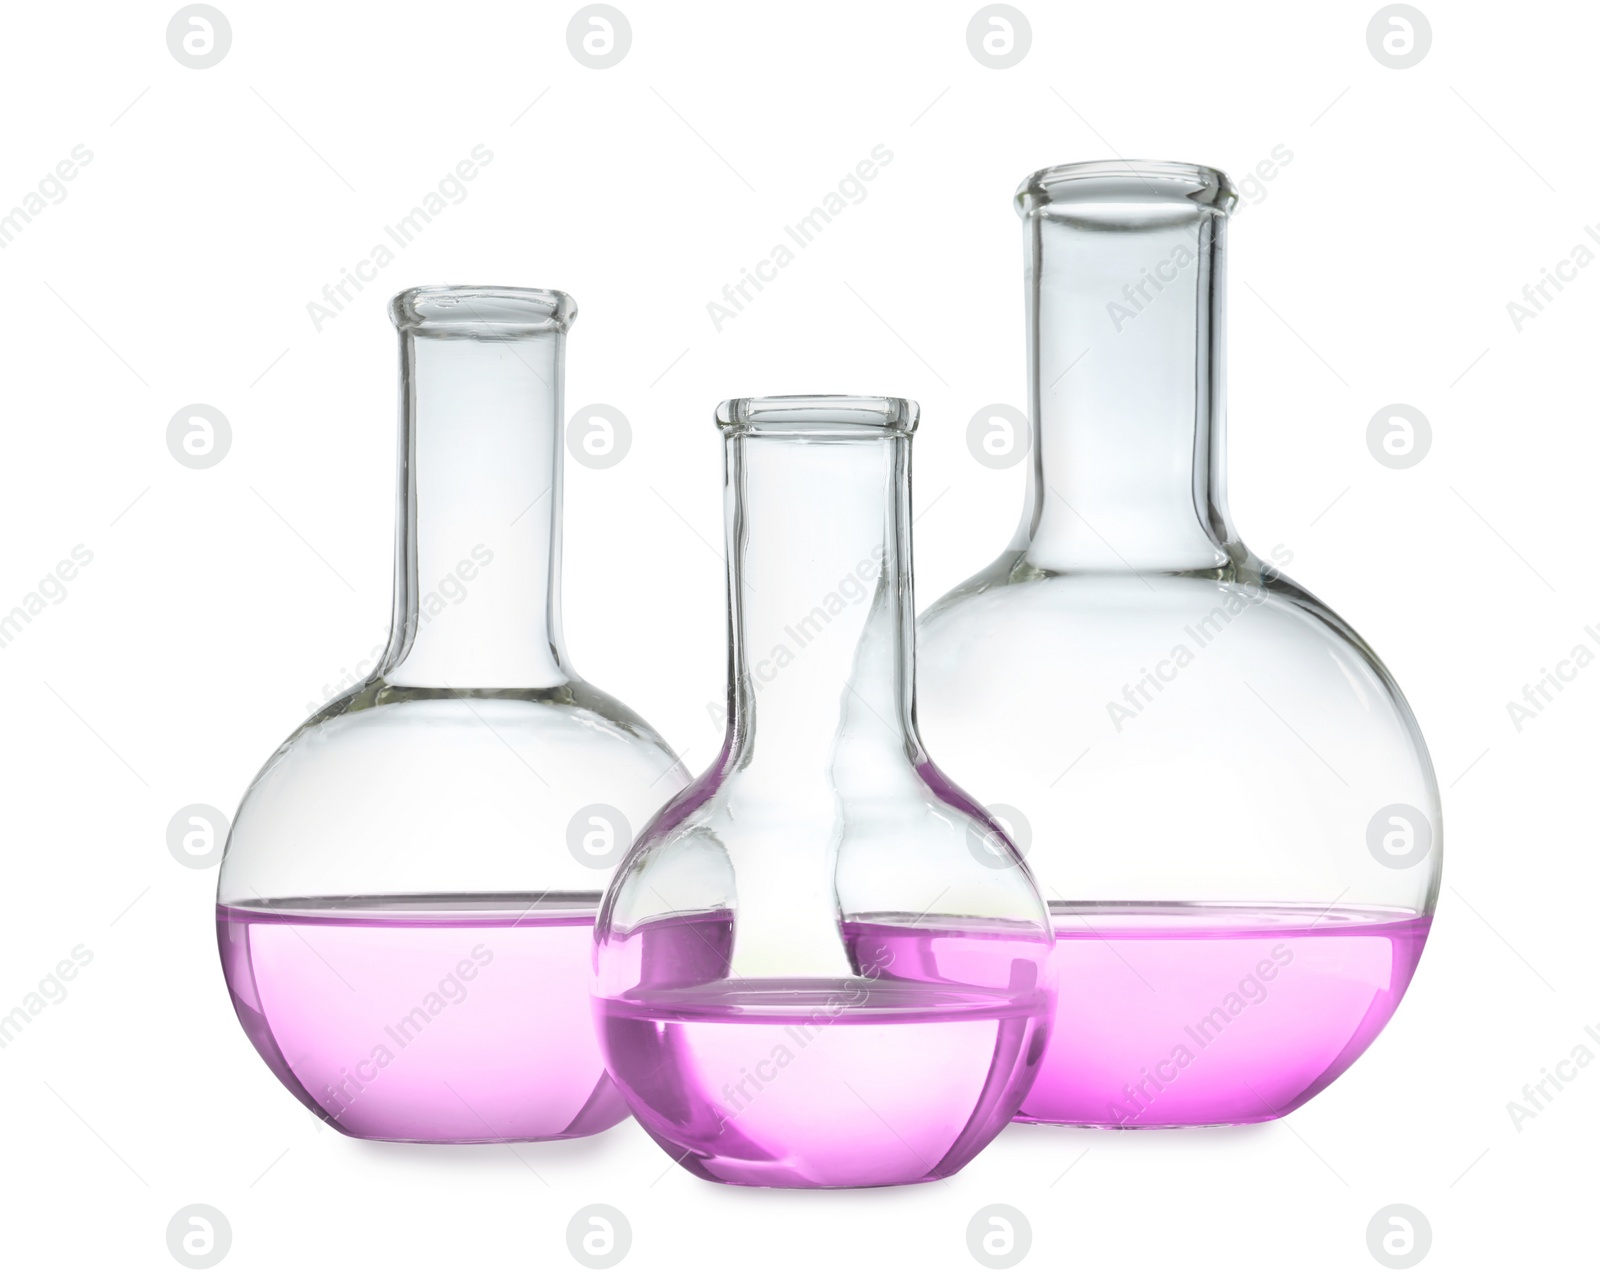 Image of Boiling flask with pink liquid isolated on white. Laboratory glassware